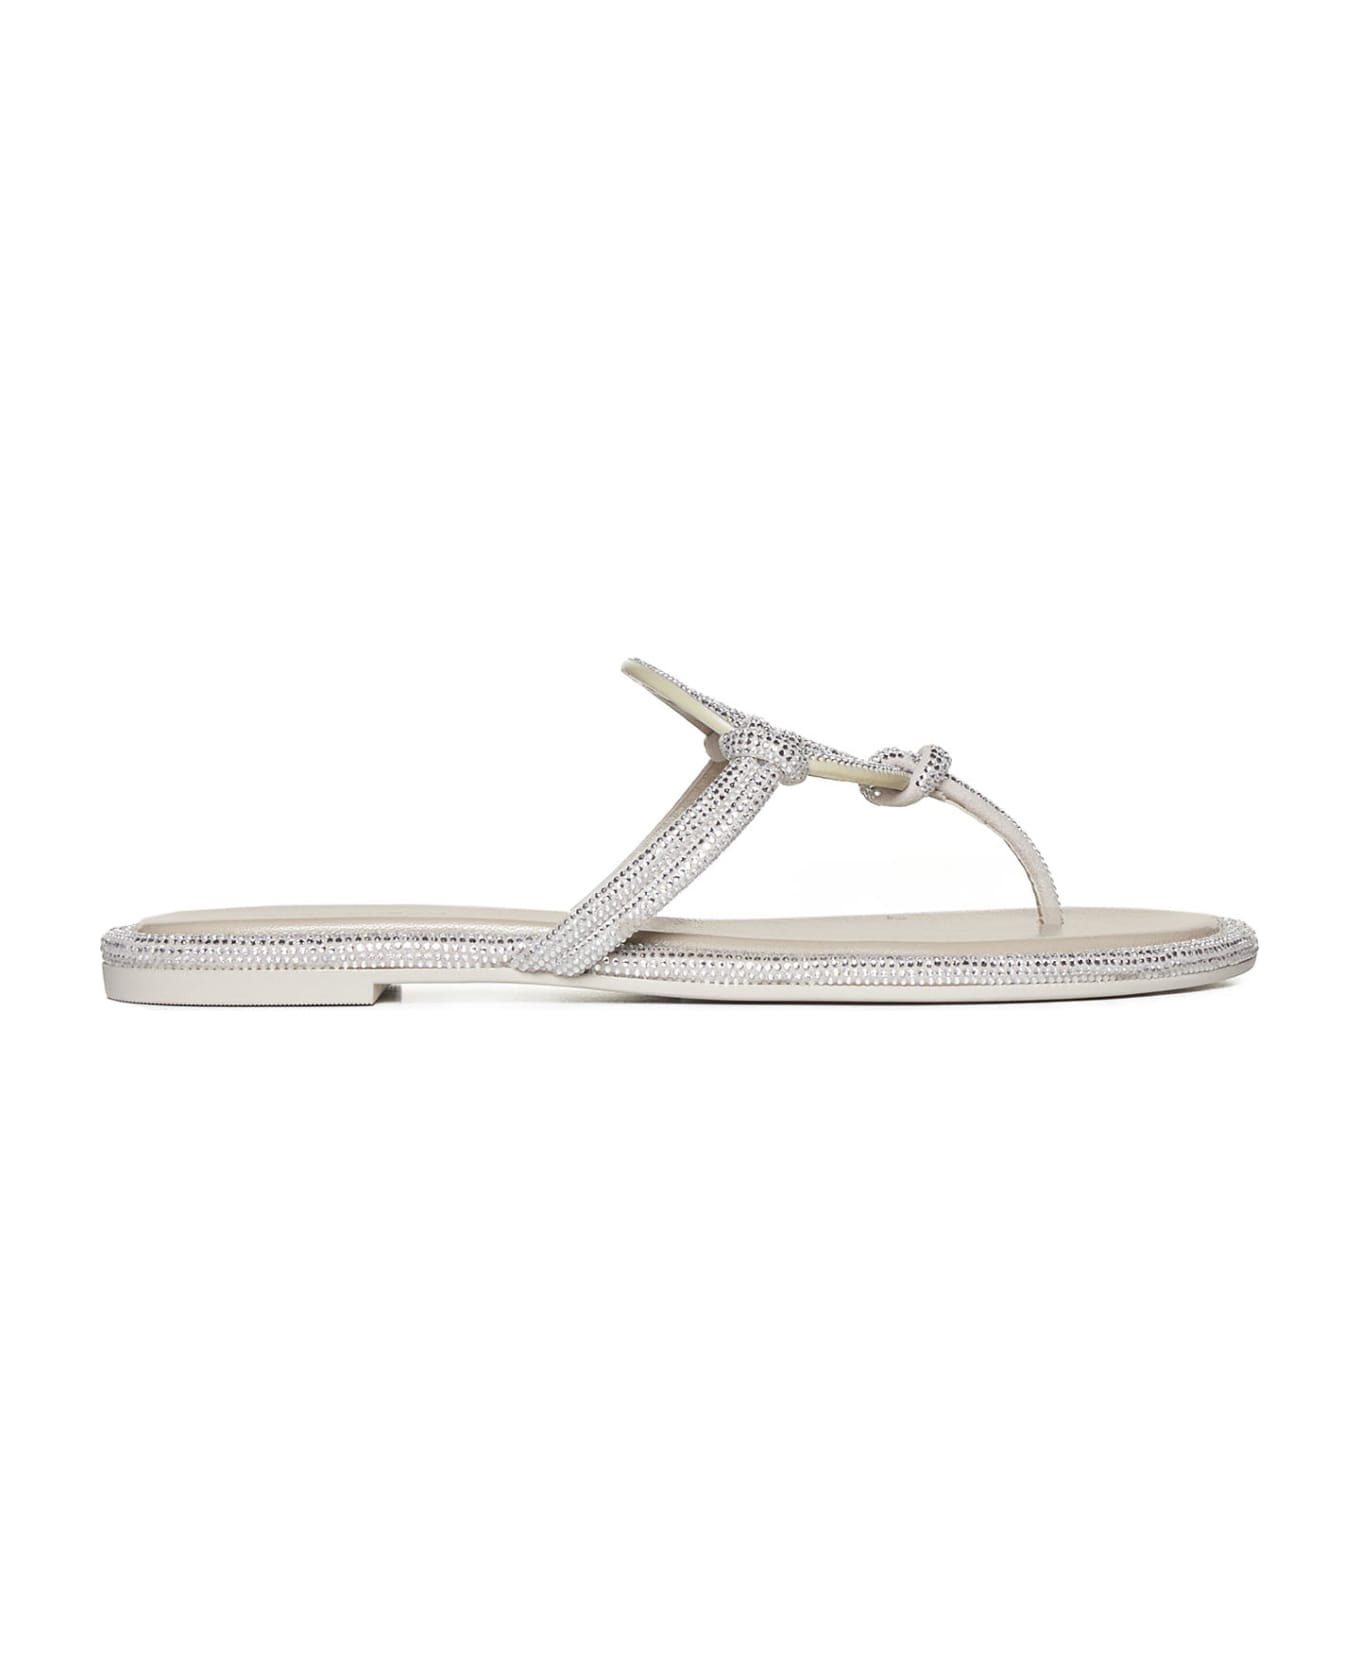 Tory Burch Miller Knotted Pave Sandals - Gray